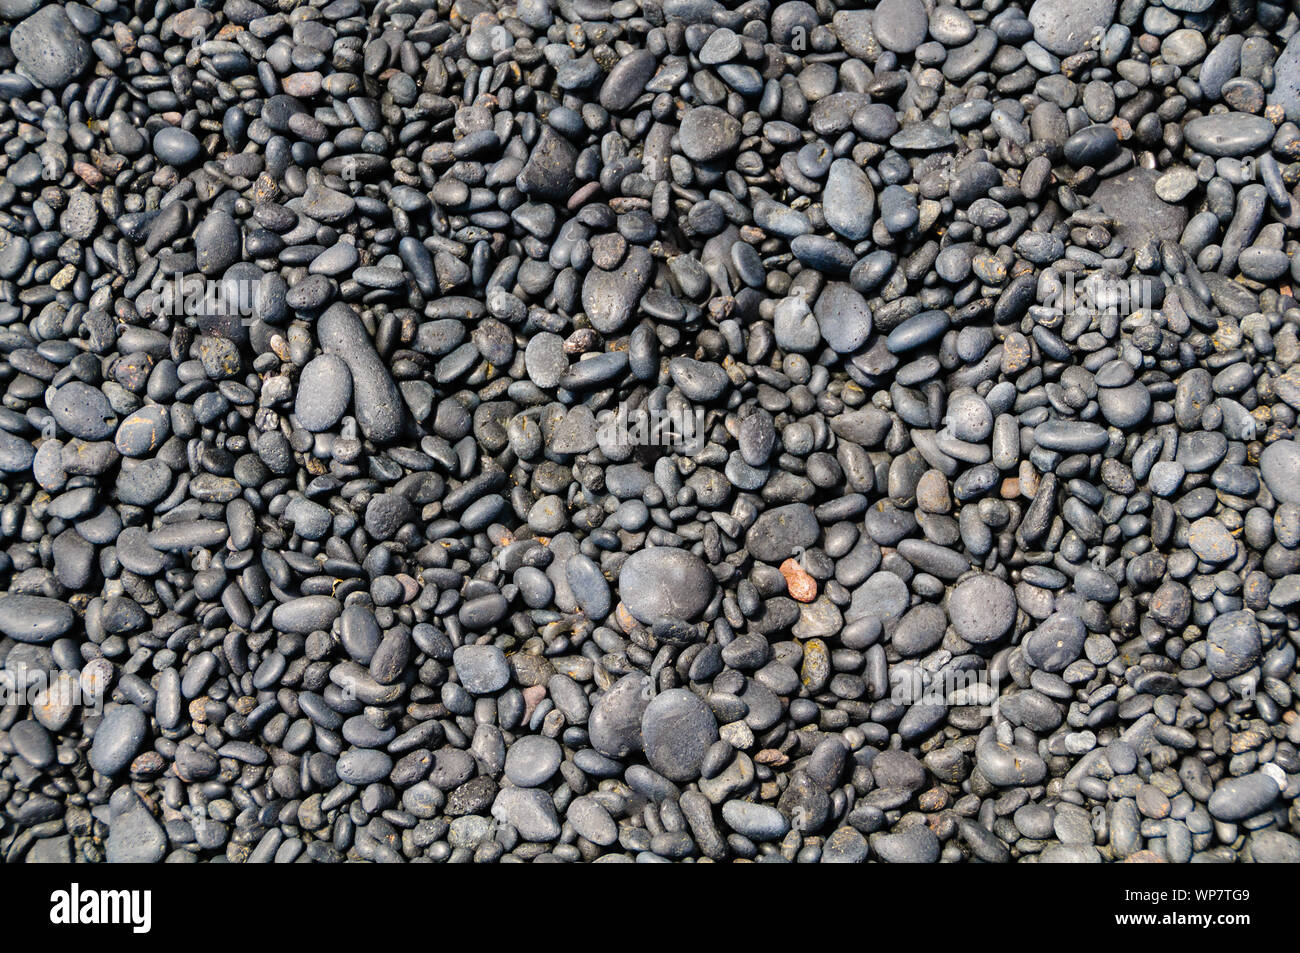 Background of smooth rounded stones on the beach, Maui, Hawaii, USA Stock Photo